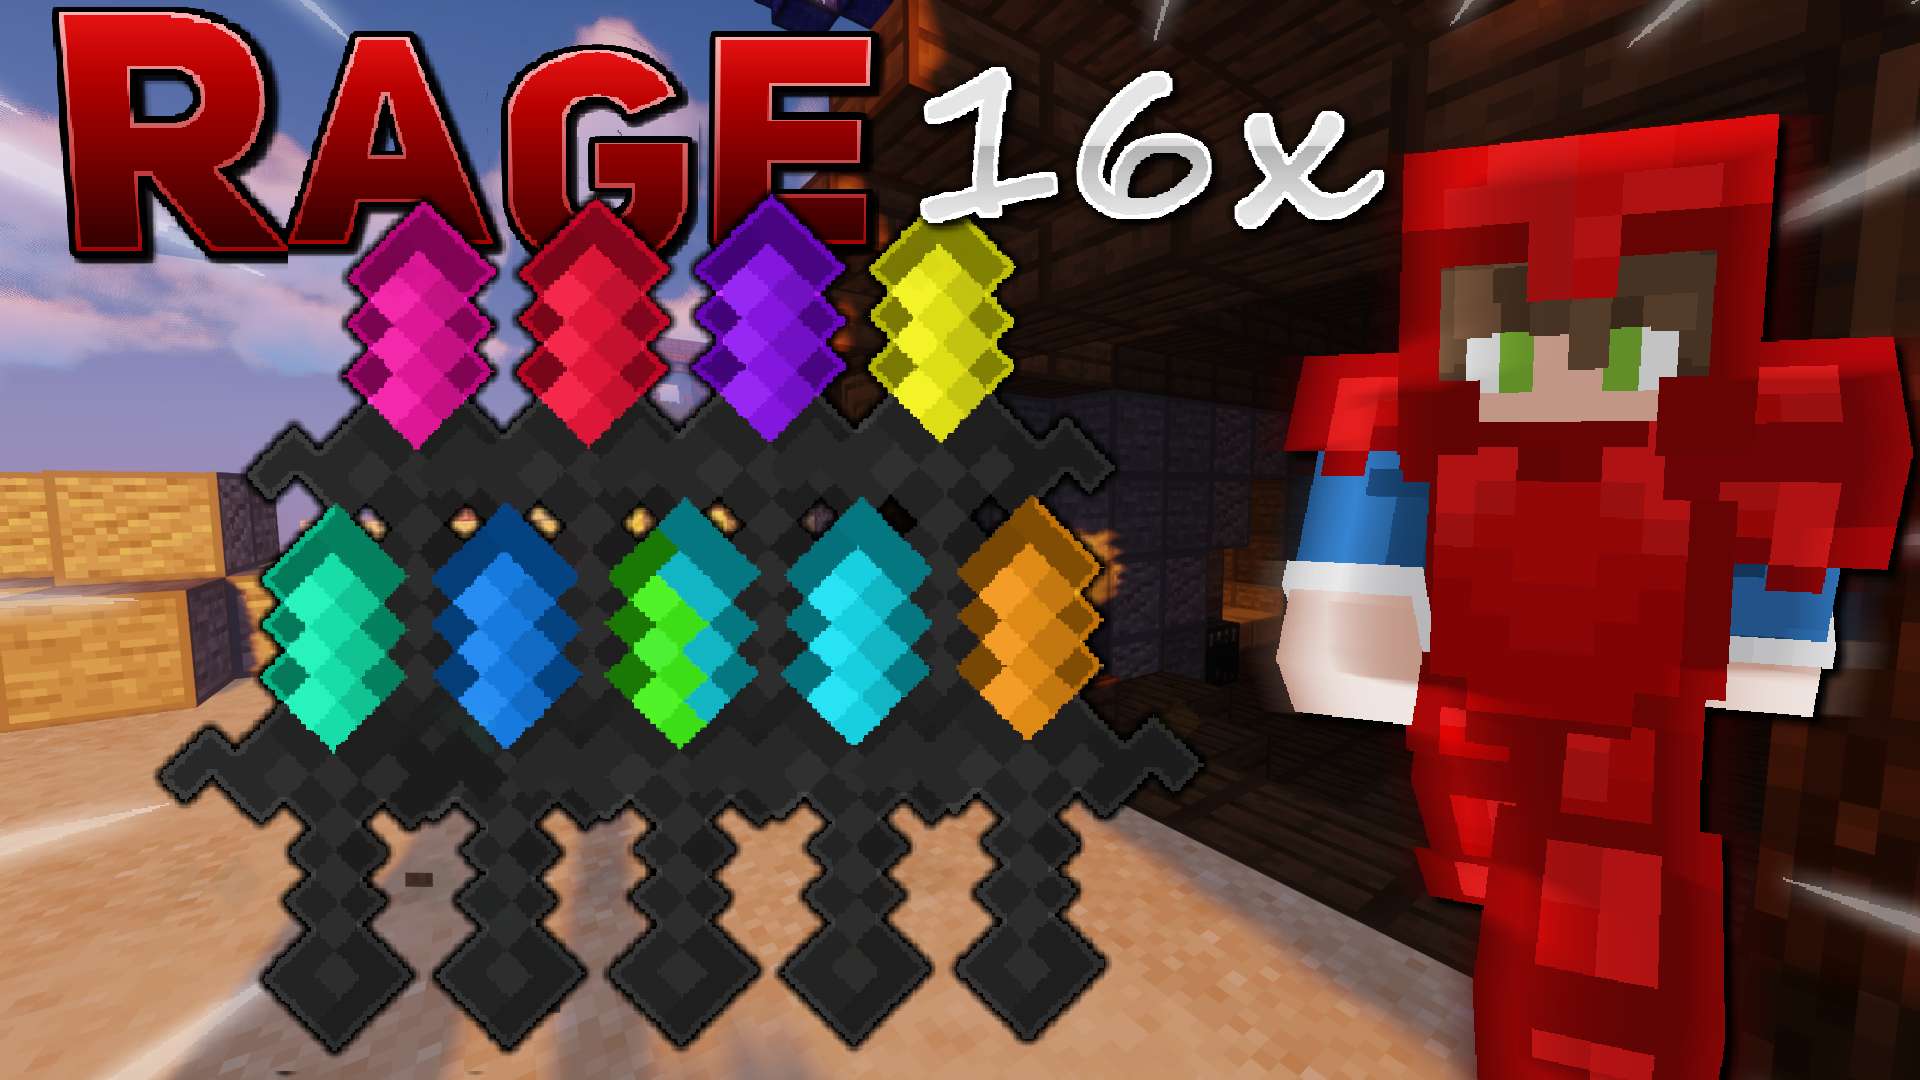 Rage Poppy Red 16x by supernovelchips on PvPRP